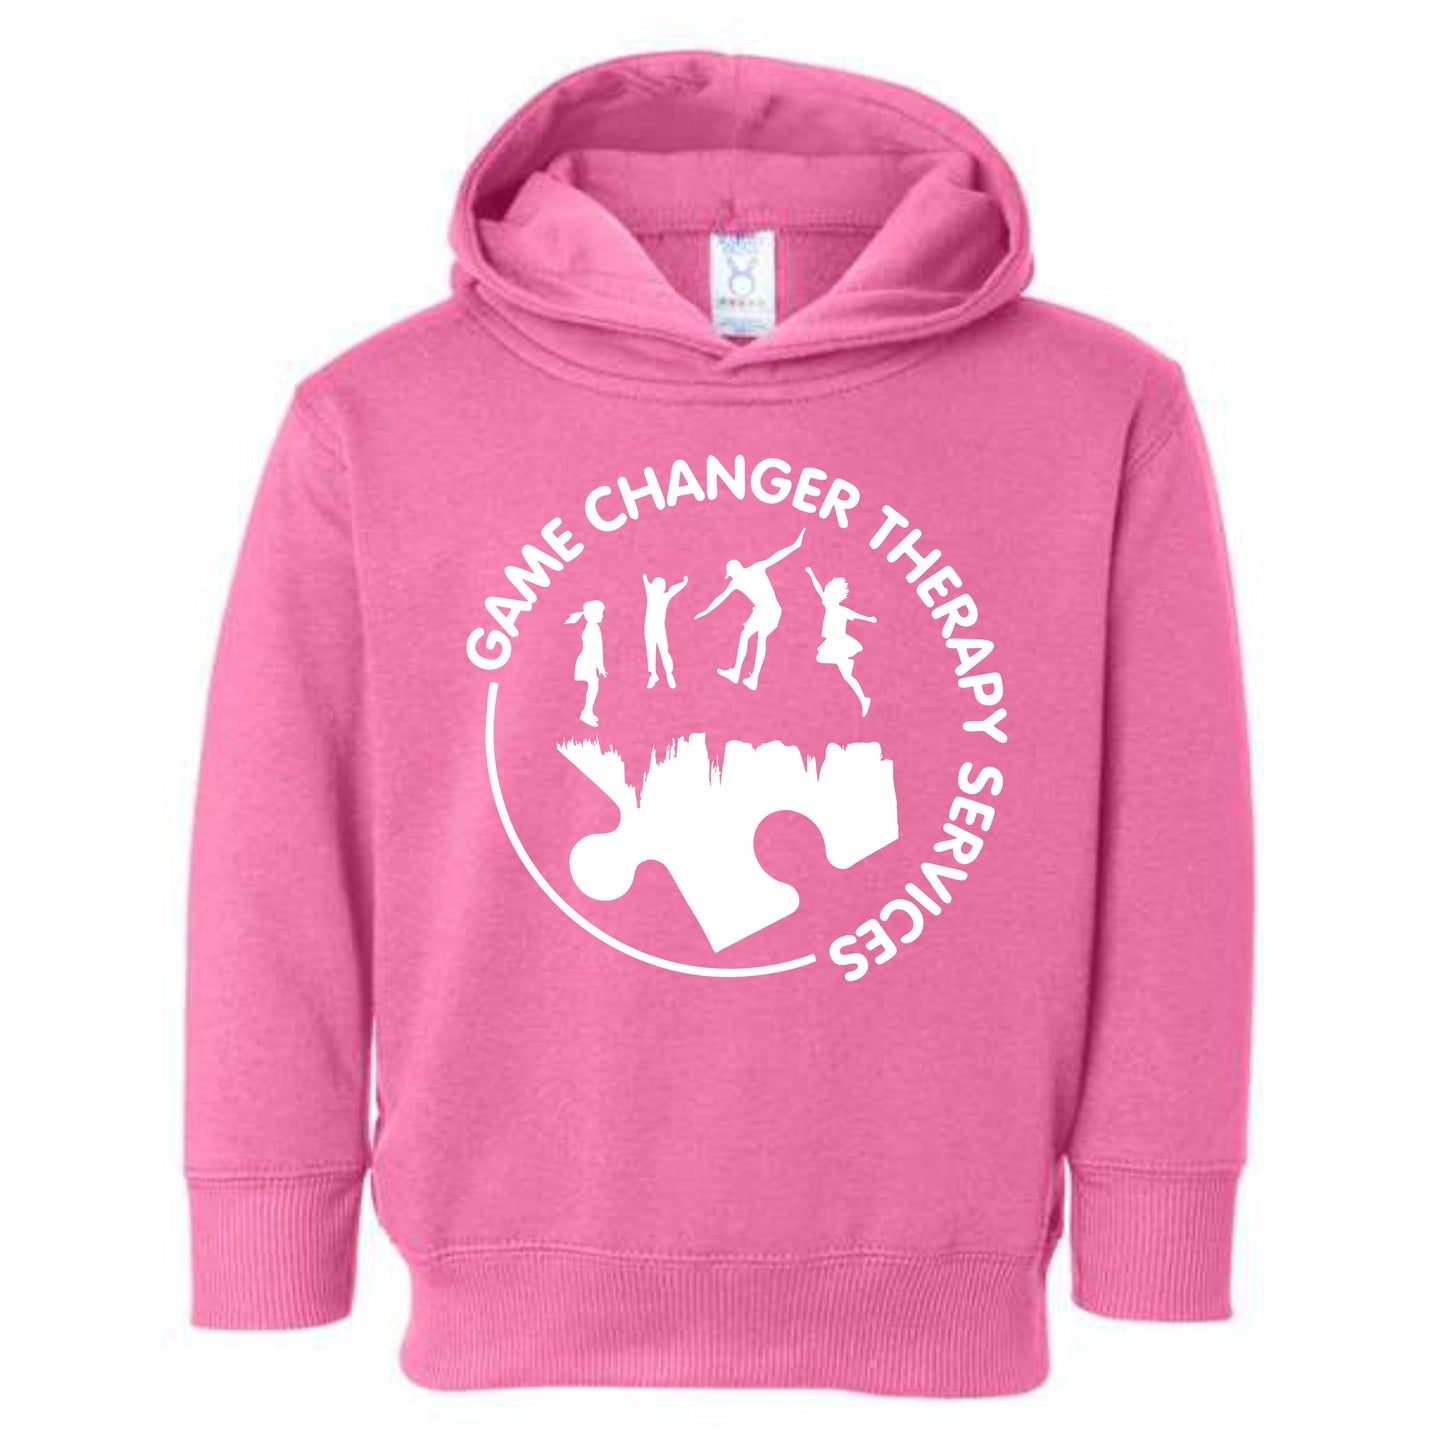 Game Changer Therapy Services Toddler Hooded Sweatshirt - White Logo